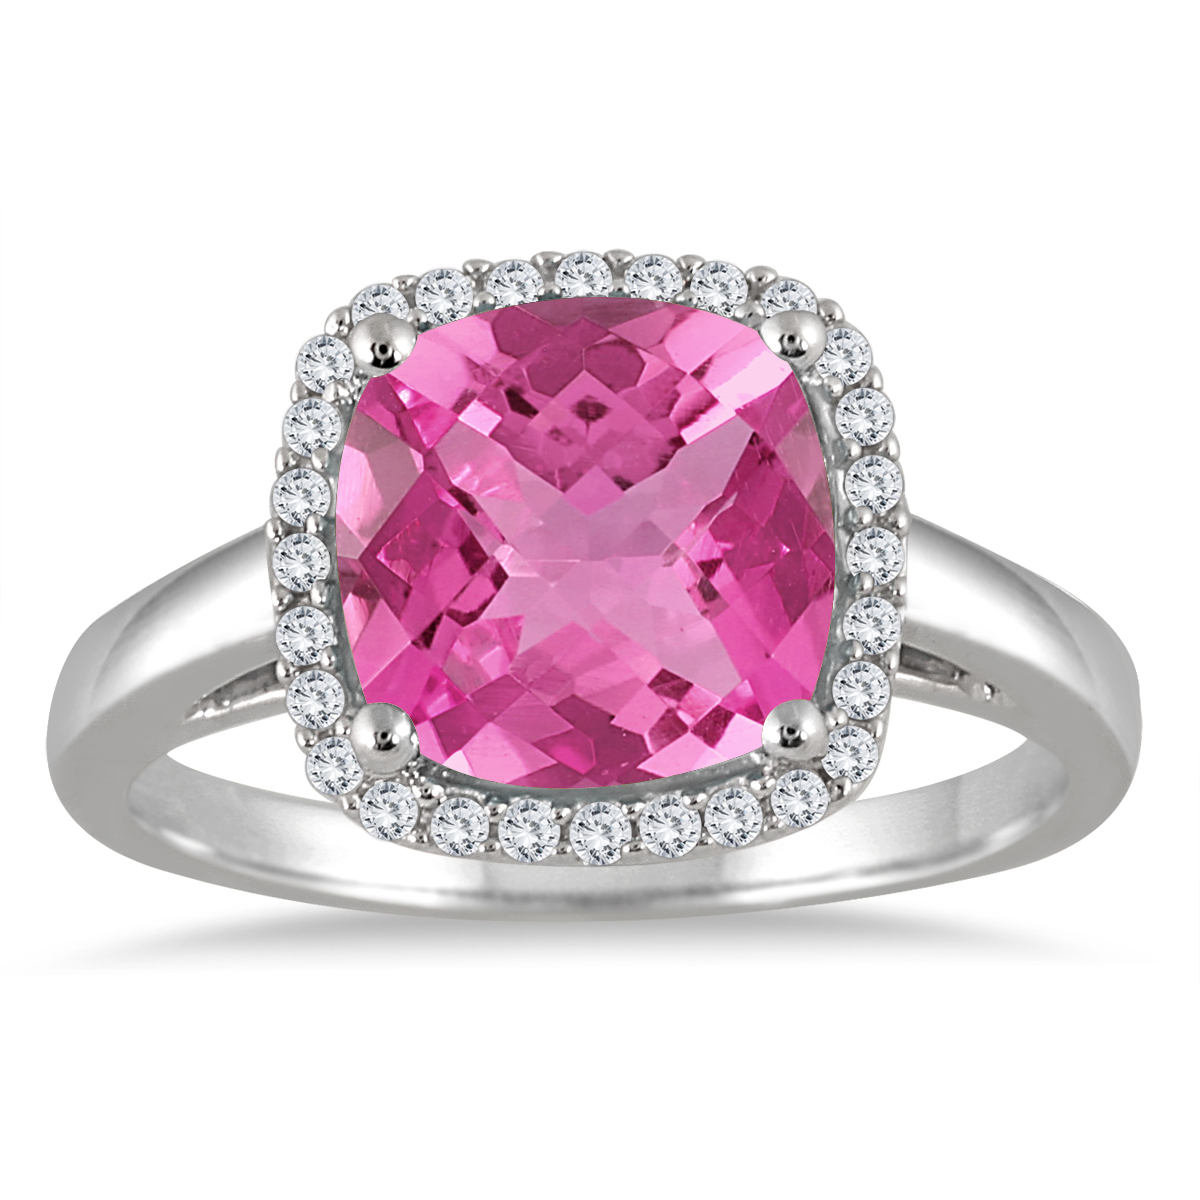 3.50 Carat Cushion Cut Pink Topaz and Diamond Halo Ring in 10K White Gold